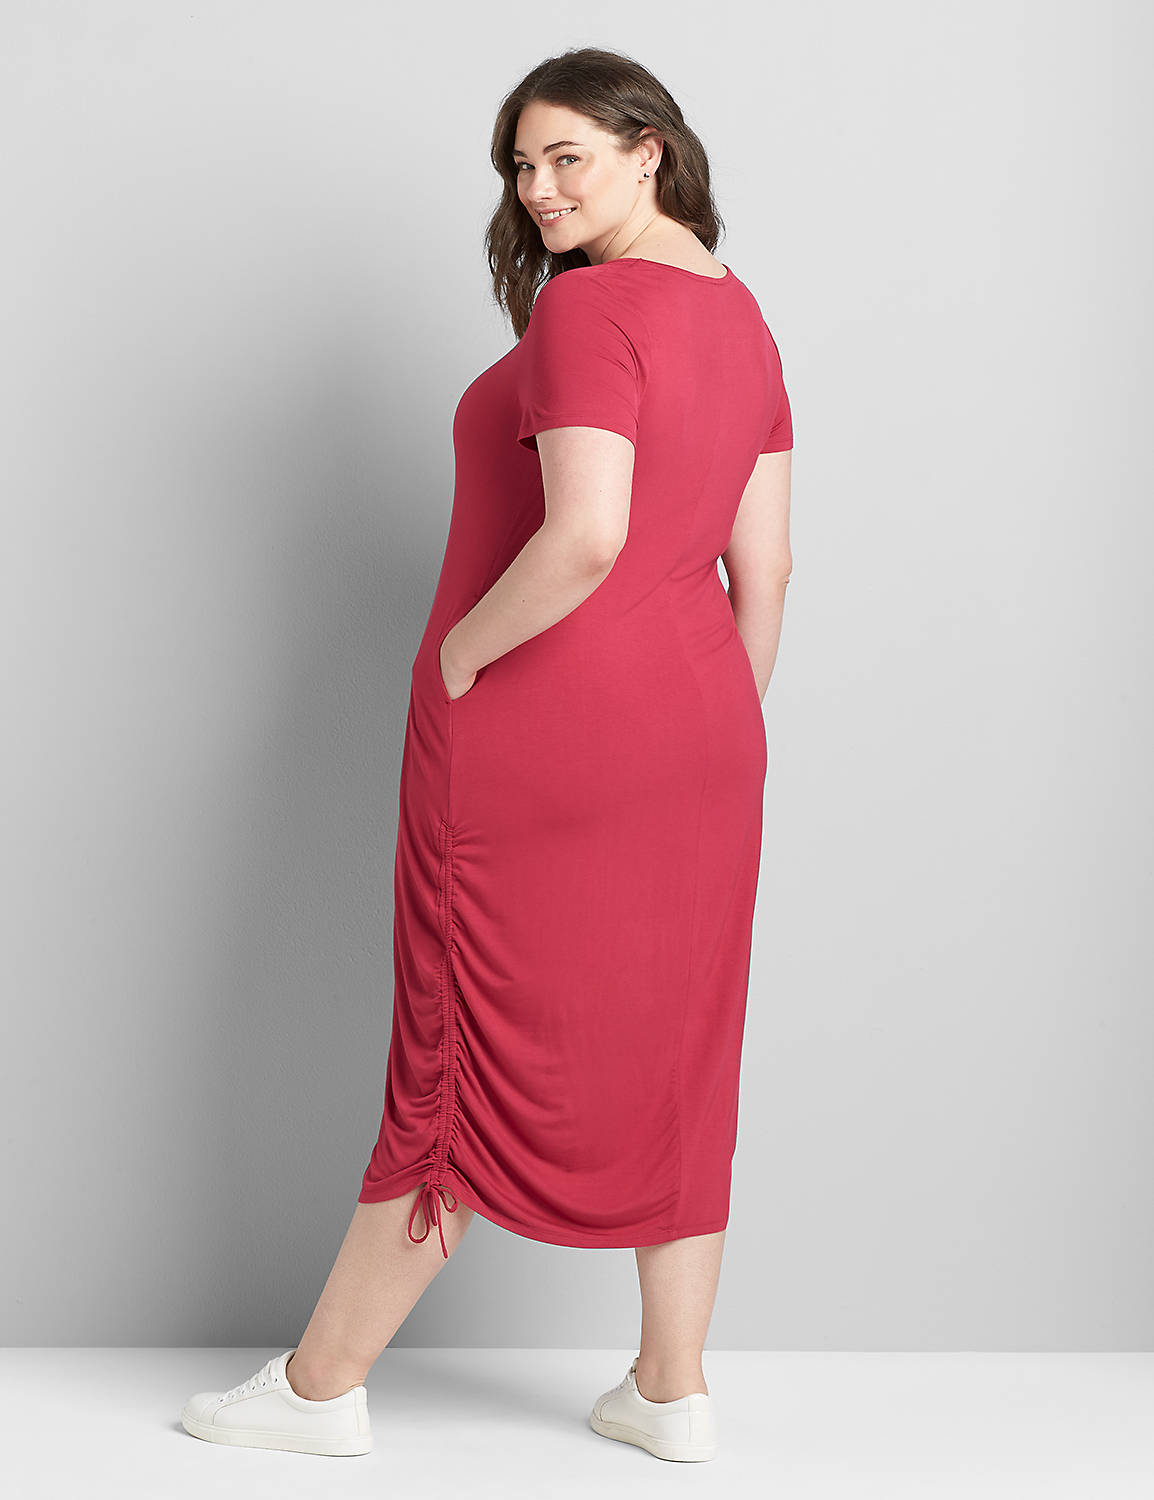 Ruched Side Midi Dress Product Image 2